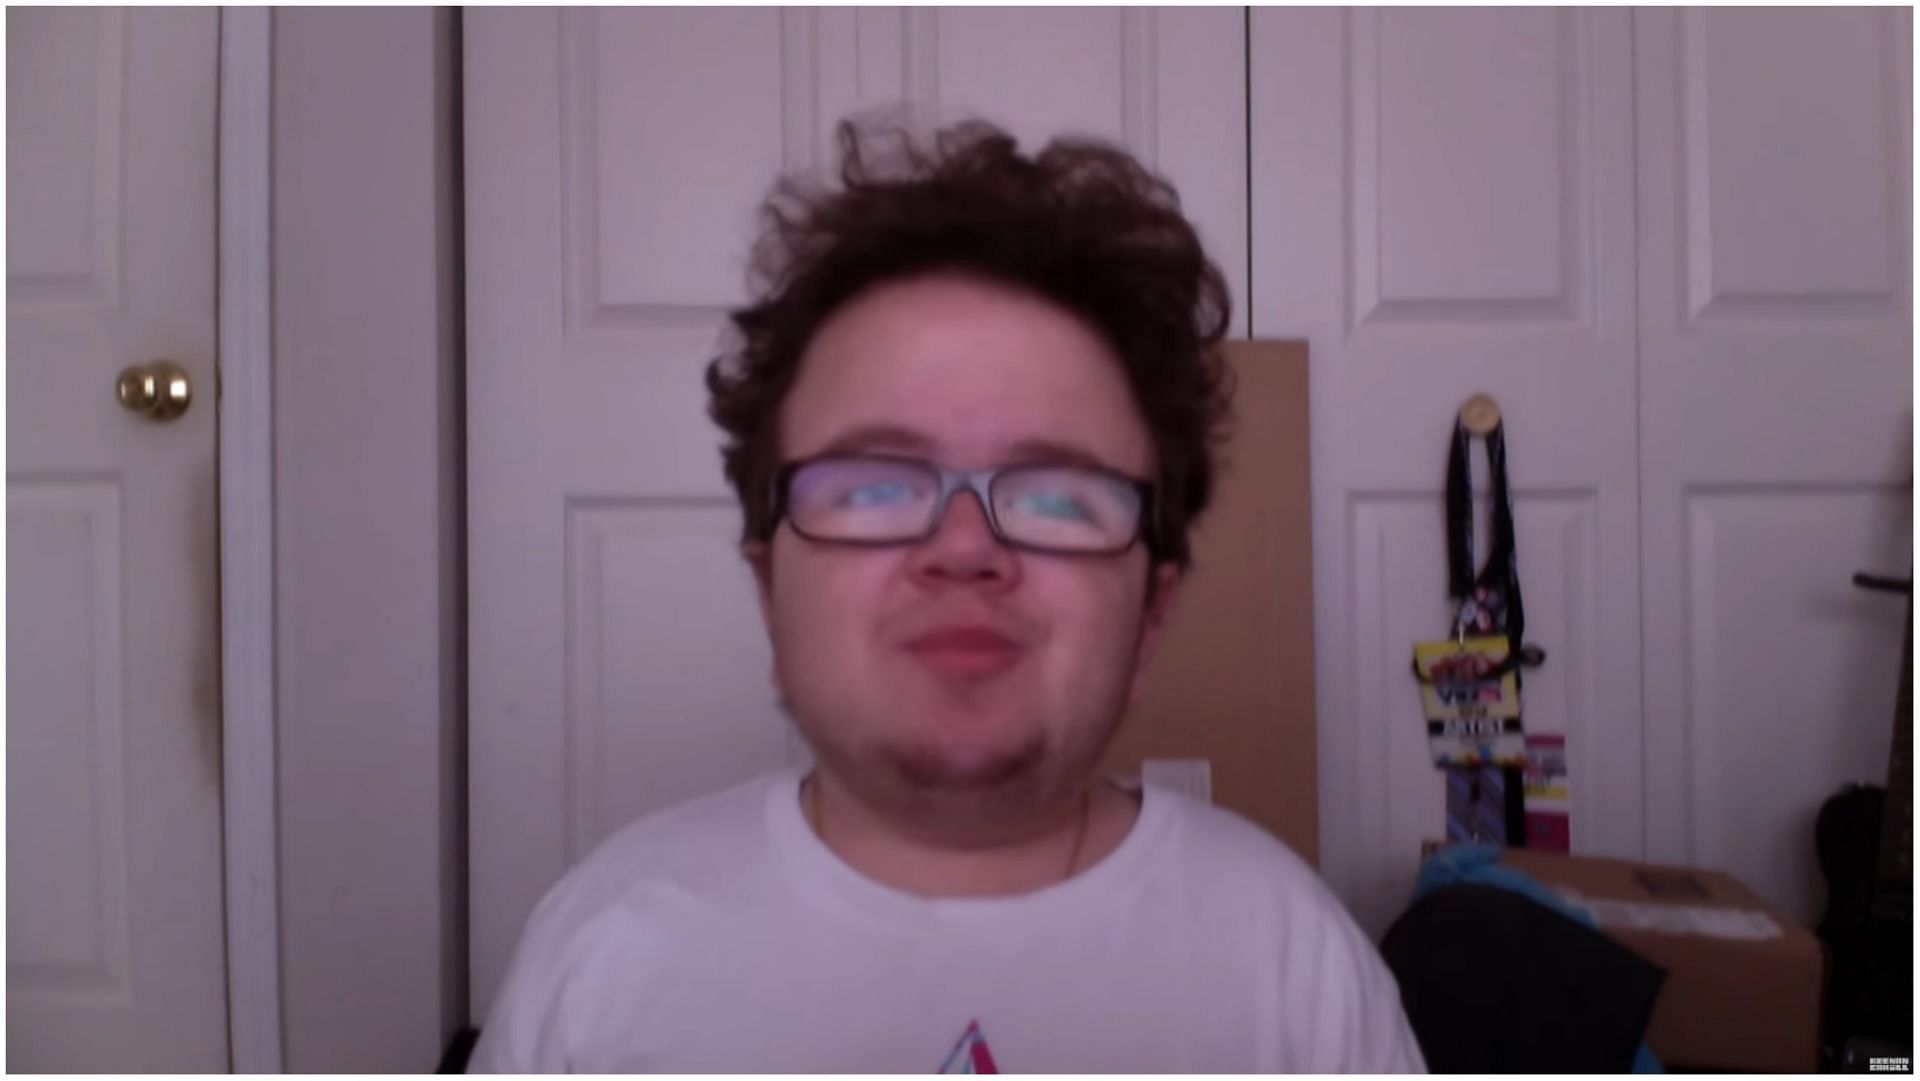 Fans are remembering Keenan Cahill following news of the YouTube star